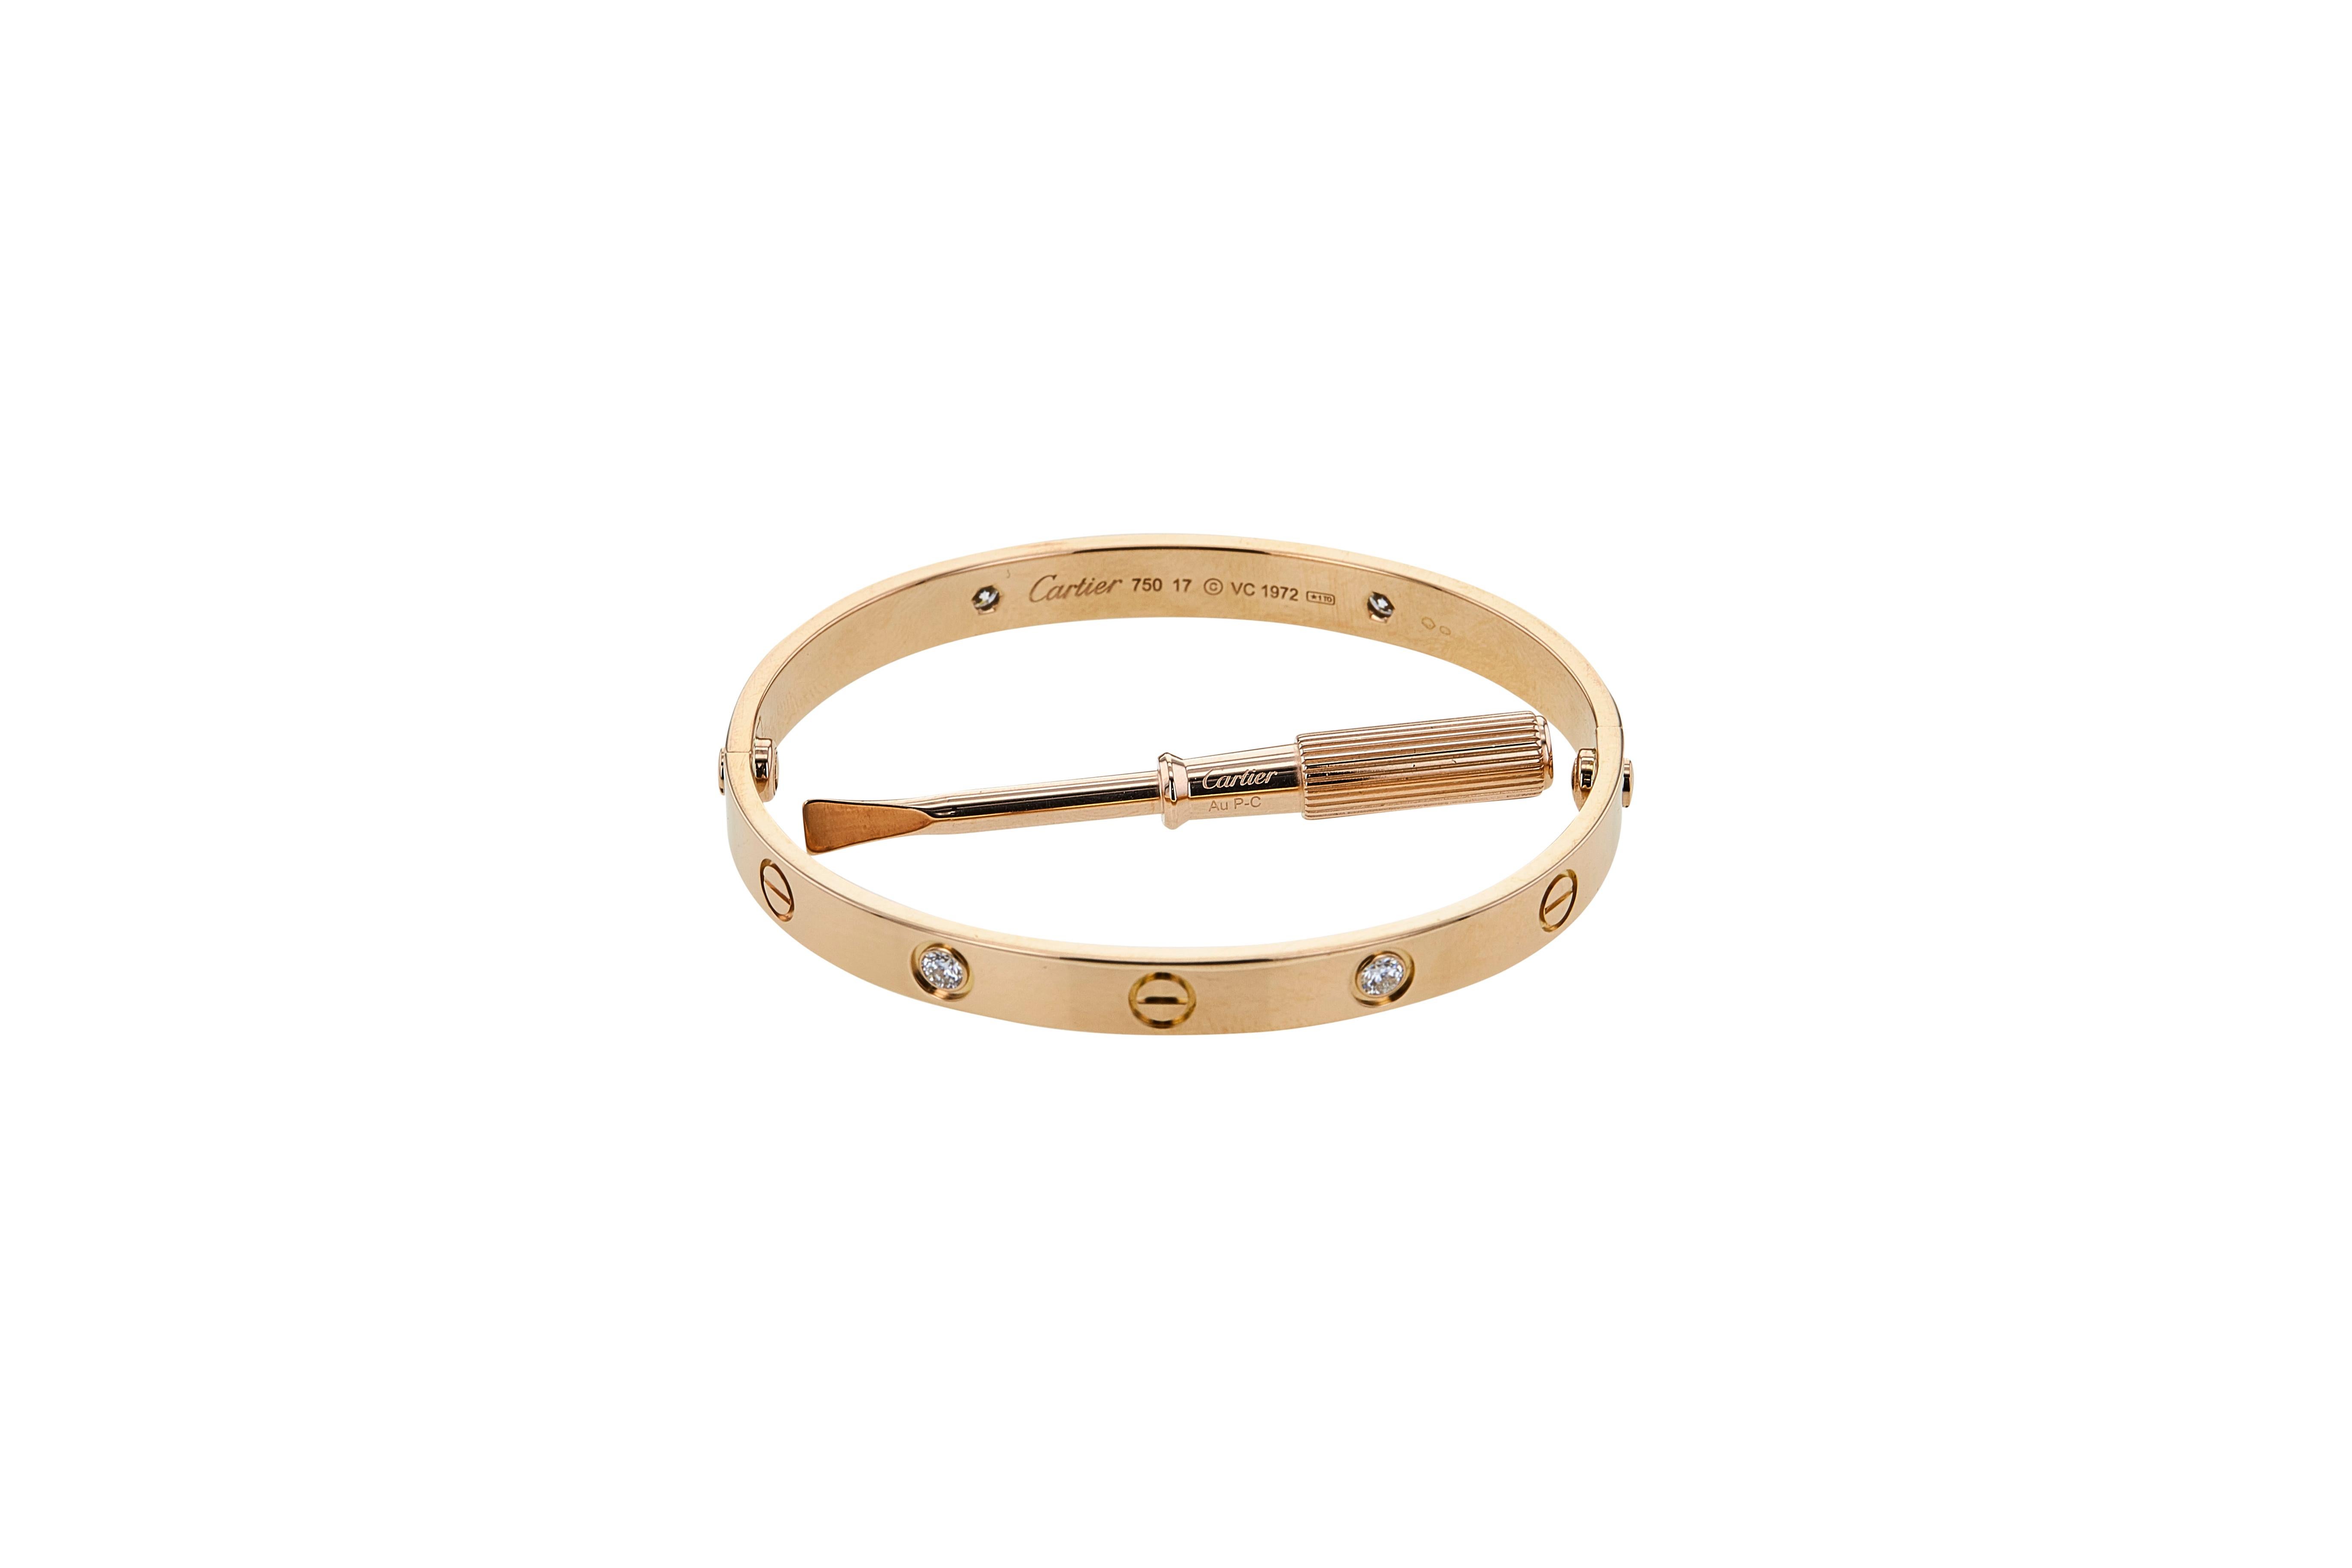 Cartier 'Love' Rose Gold 4-Diamond Bracelet. Size 17 In Good Condition For Sale In New York, NY